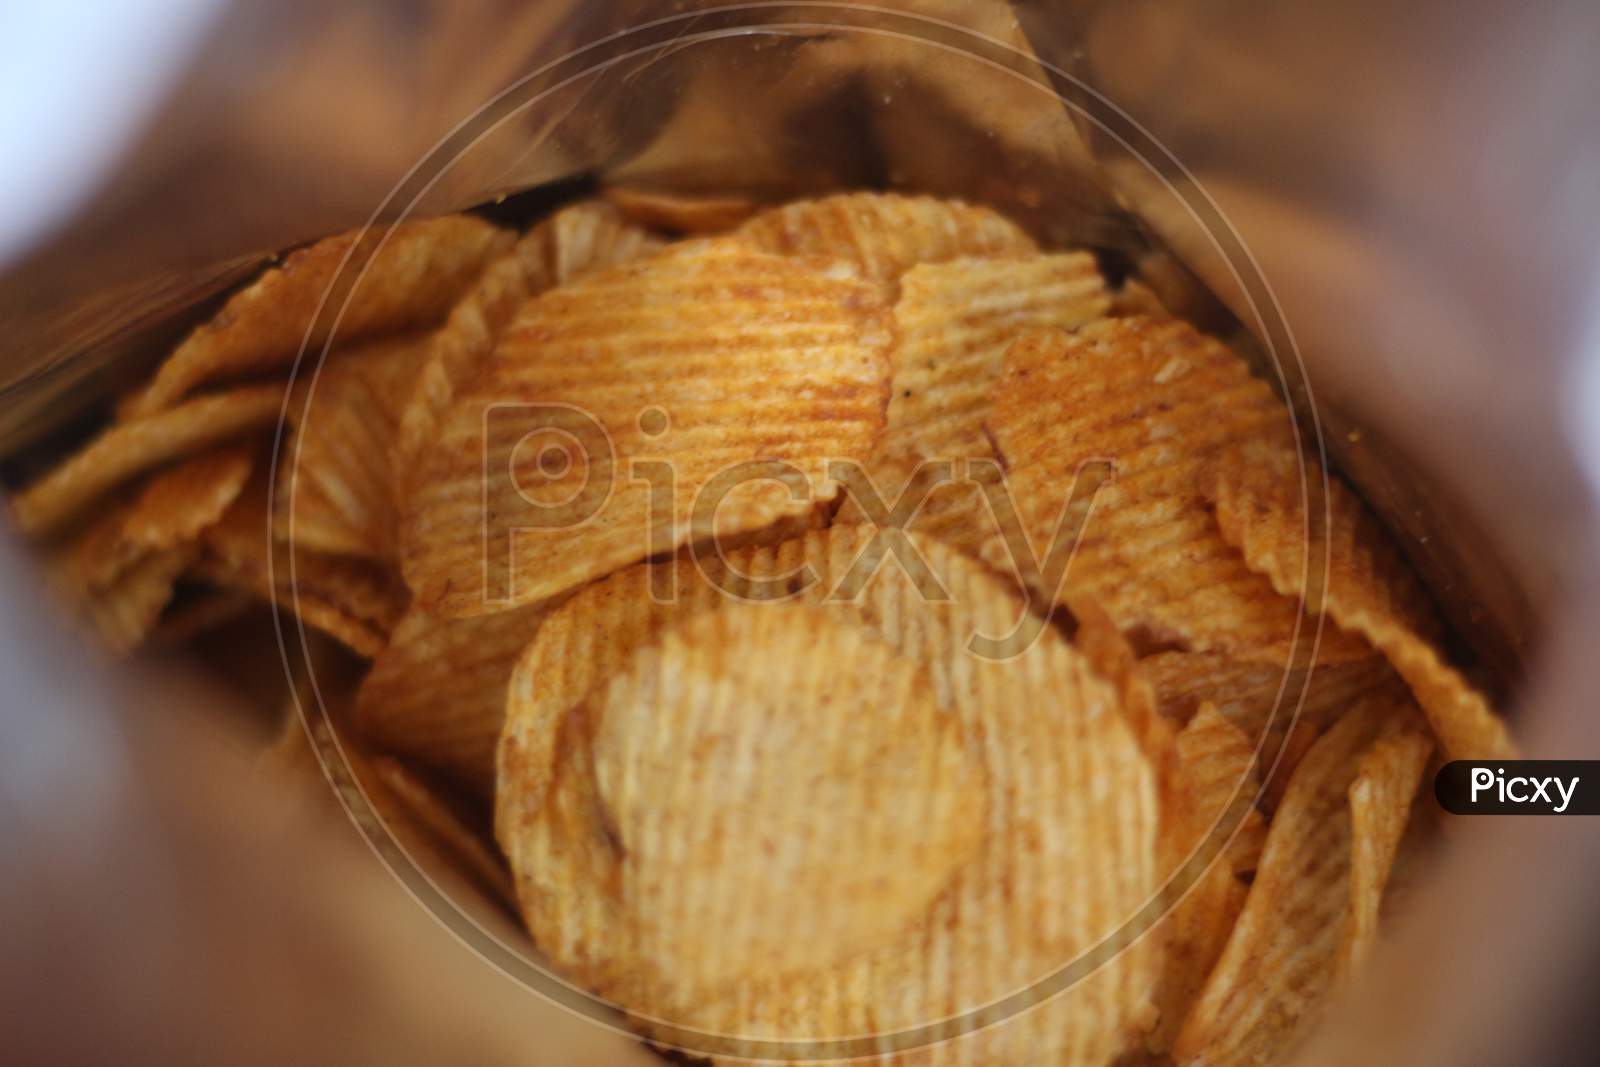 Potato chips inside the packet